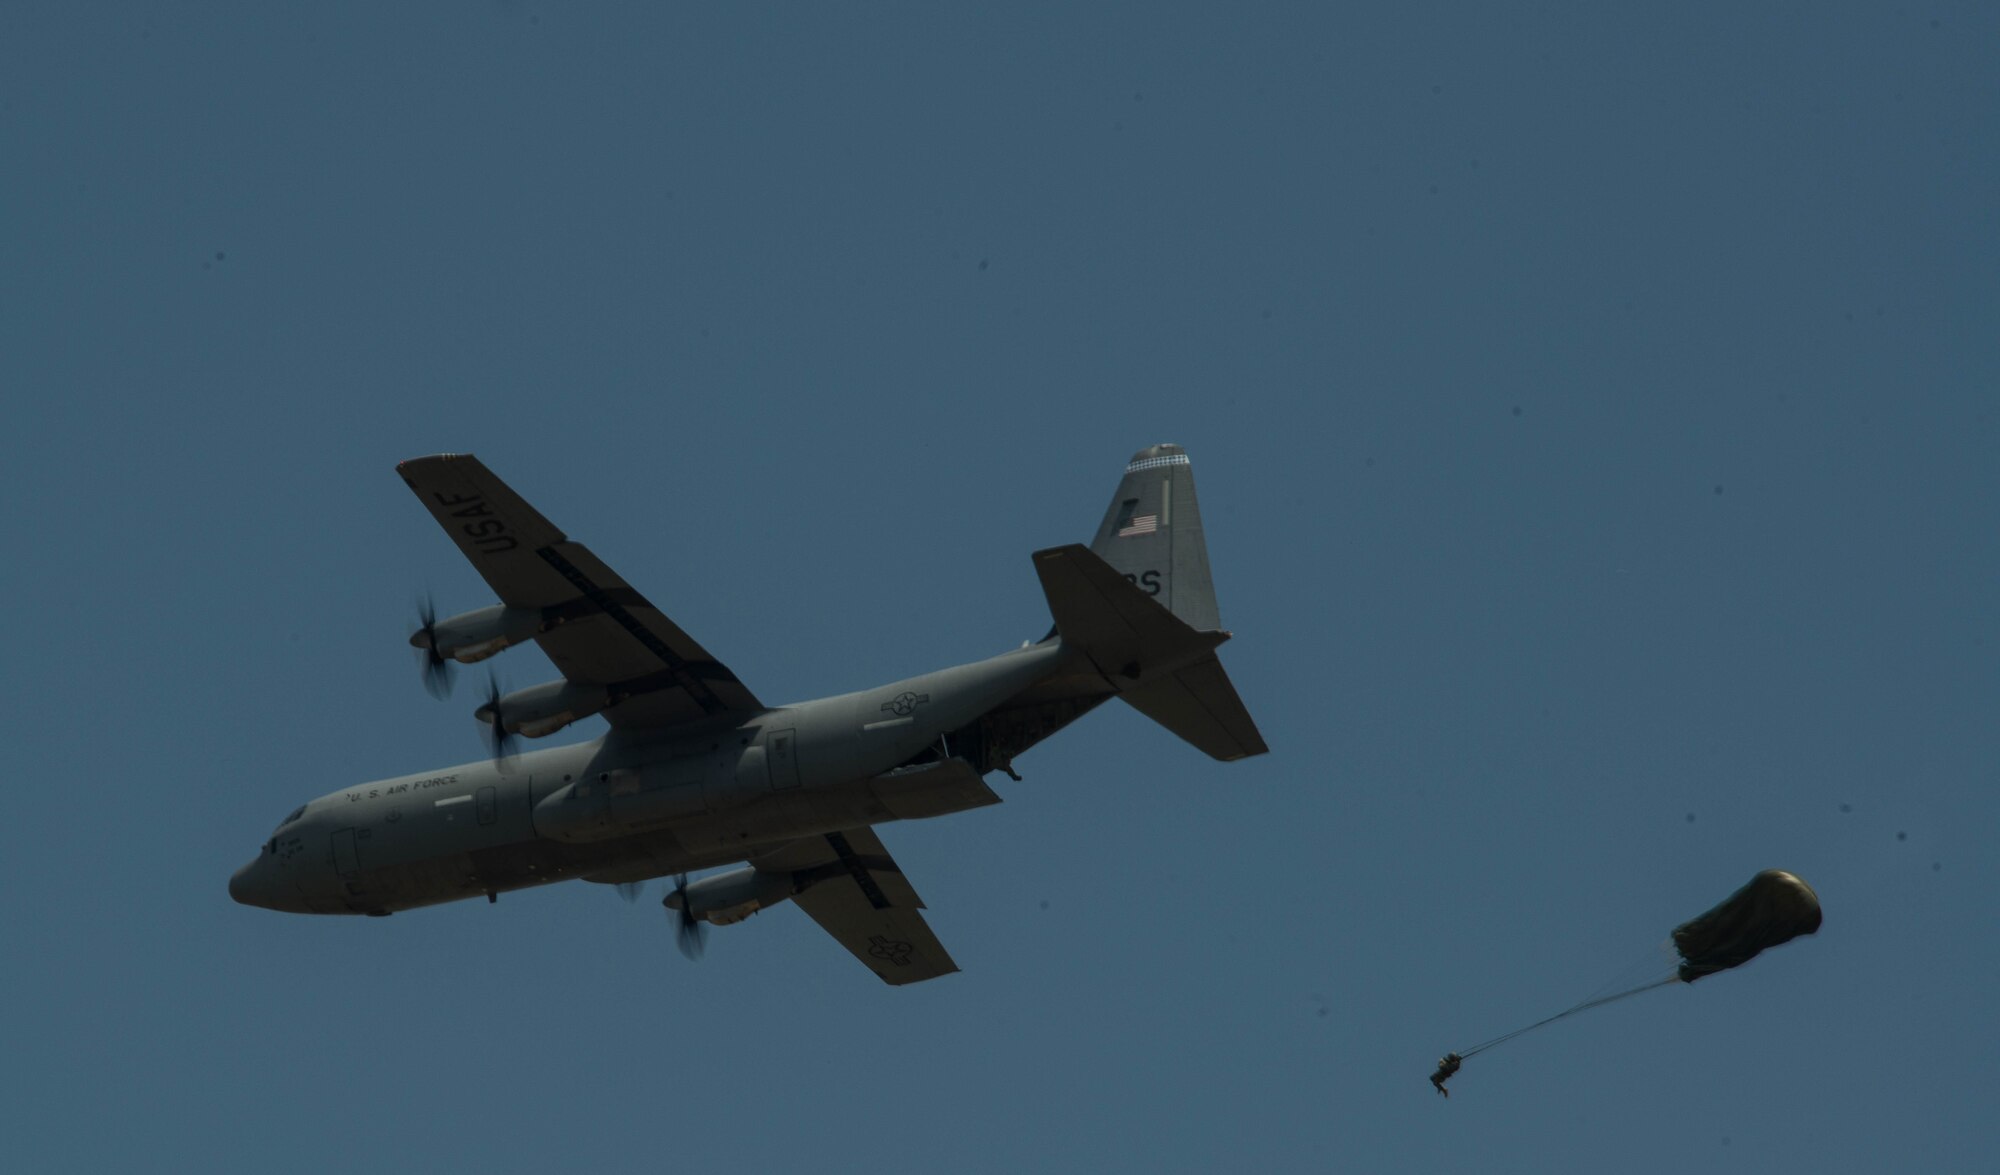 A Greek paratrooper conducts a static-line jump out of a U.S. Air Force C-130J Super Hercules during Exercise Stolen Cerberus IV above Megara, Greece, April 22, 2017. Throughout the exercise, 265 Greek paratroopers conducted static-line and military free-fall jumps form U.S. aircrafts. As NATO allies, the U.S. and Greece share a commitment to promote peace and stability, and seek opportunities to continue developing their strong relationship. (U.S Air Force photo by Senior Airman Tryphena Mayhugh)